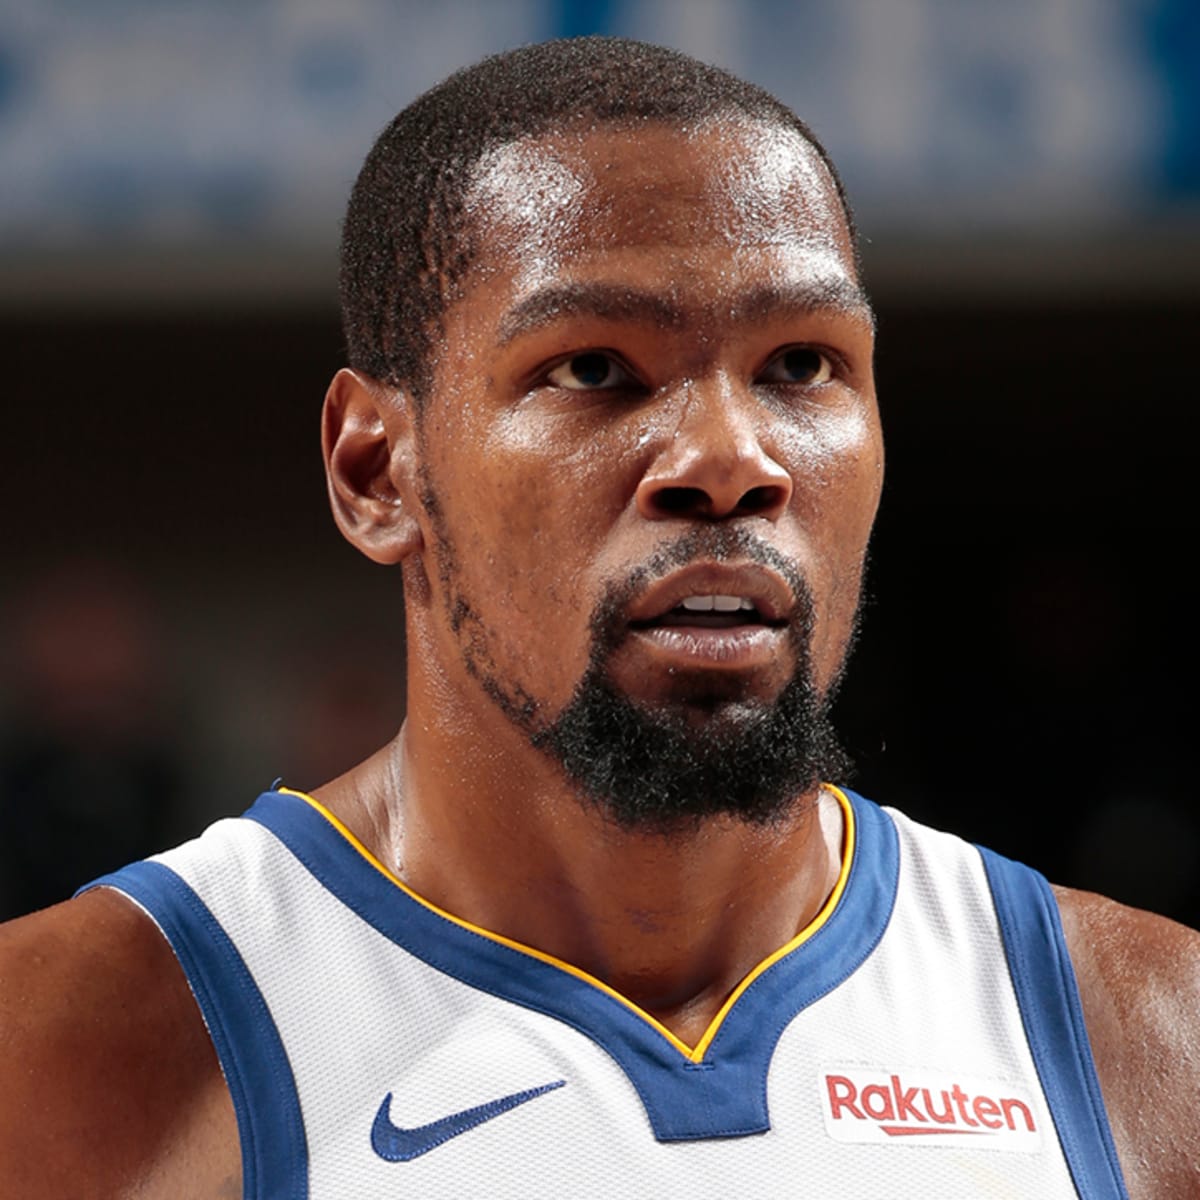 Kevin Durant on myCast - Fan Casting Your Favorite Stories